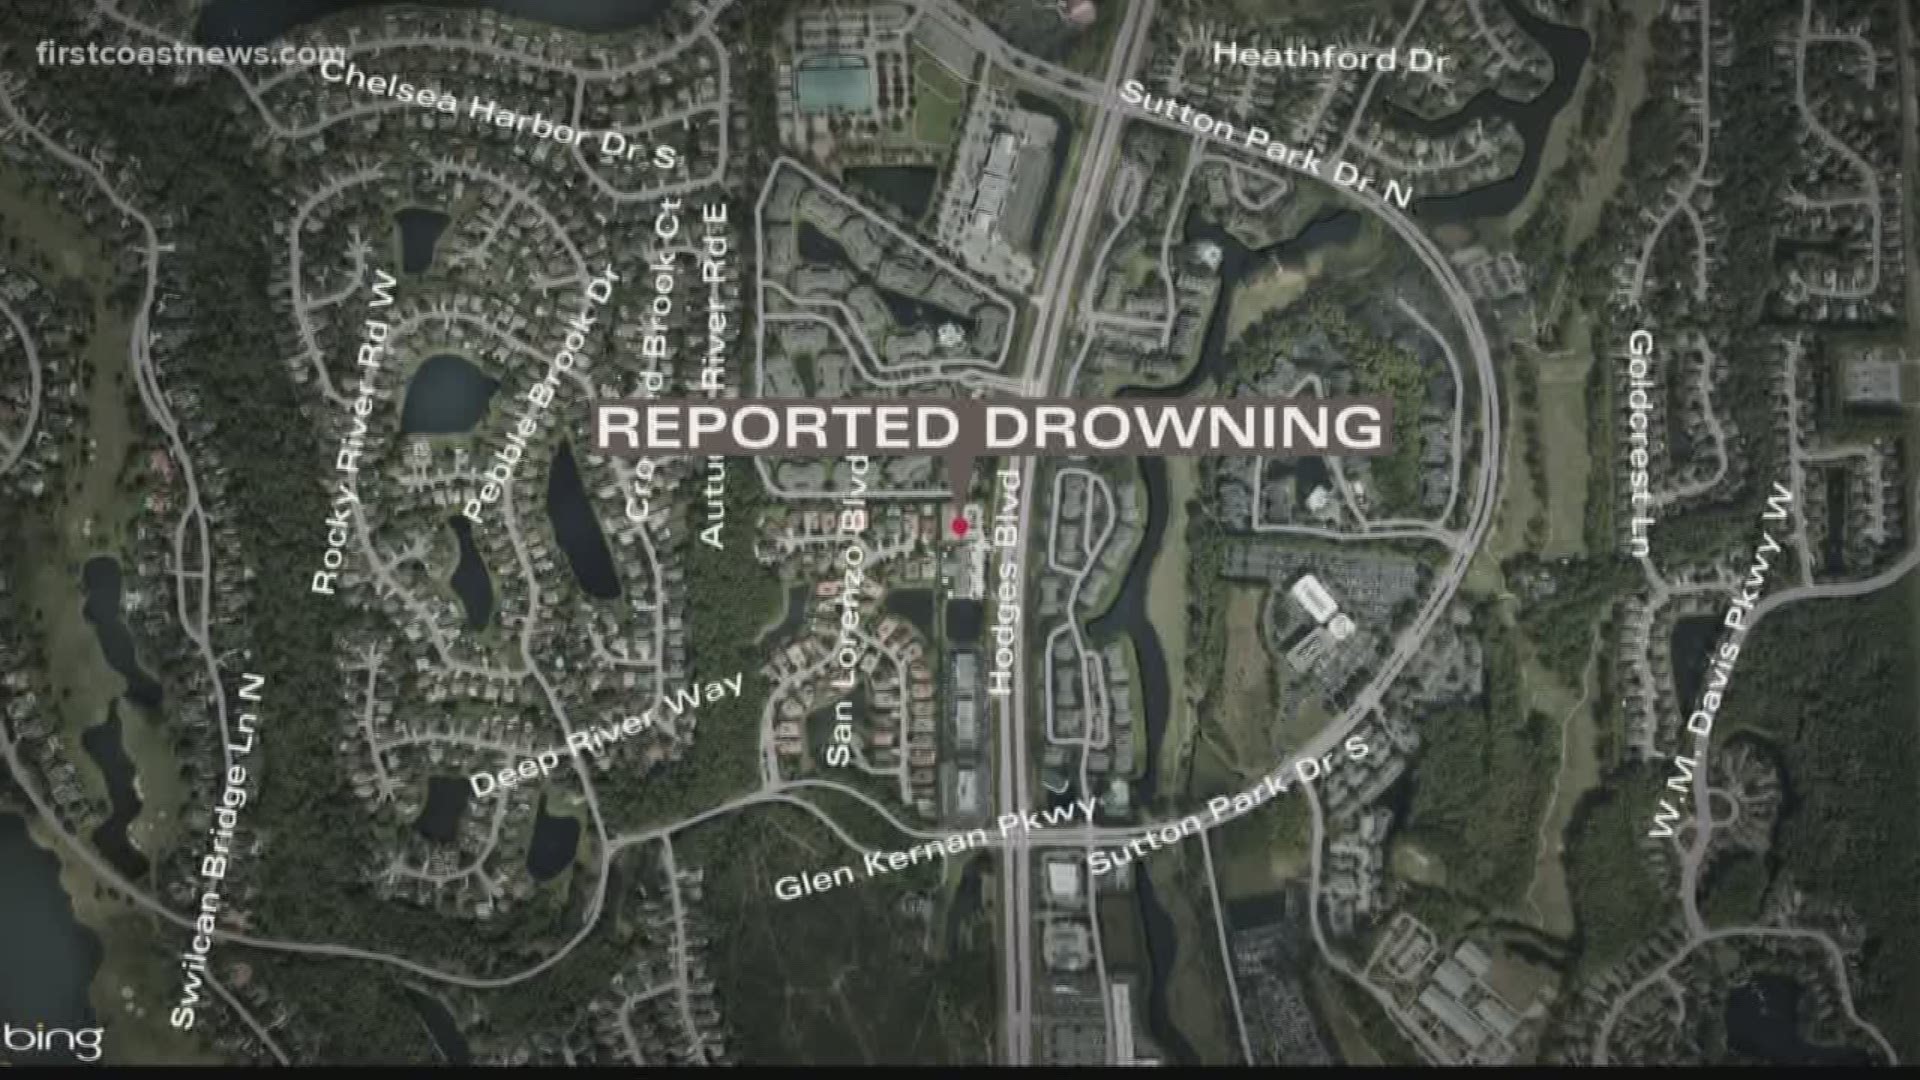 A 6-year-old child has drowned after ending up in the retention pond of a Southside apartment complex Friday, according to police.